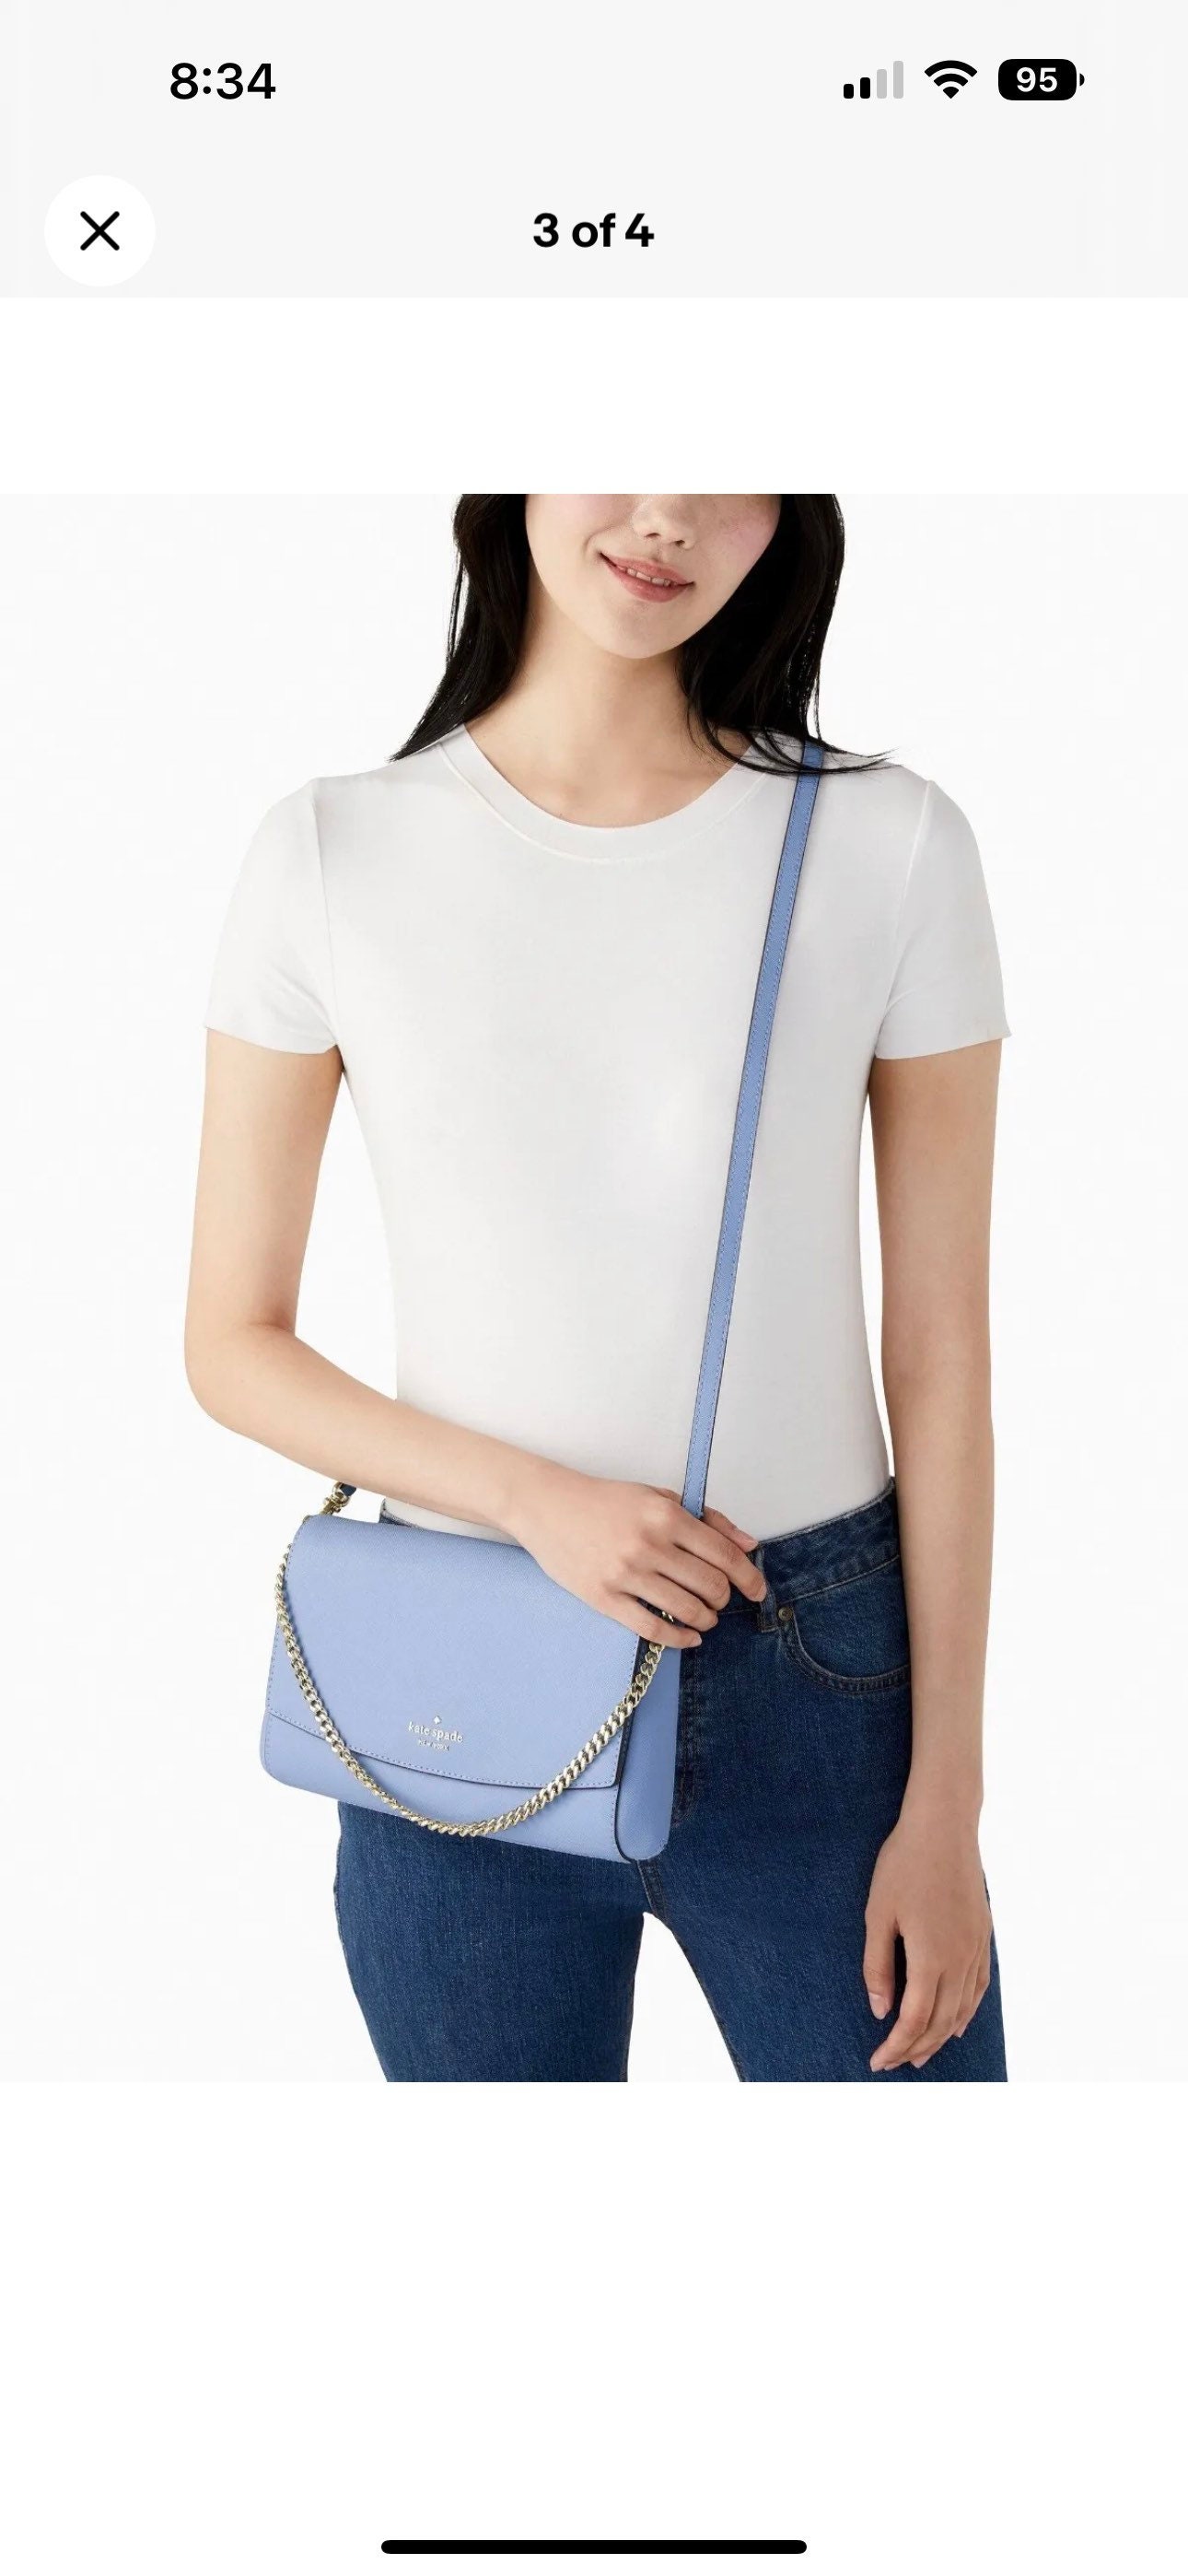 Kate Spade Greer Chain Crossbody Pale Blue Saffiano Leather -  Sweden